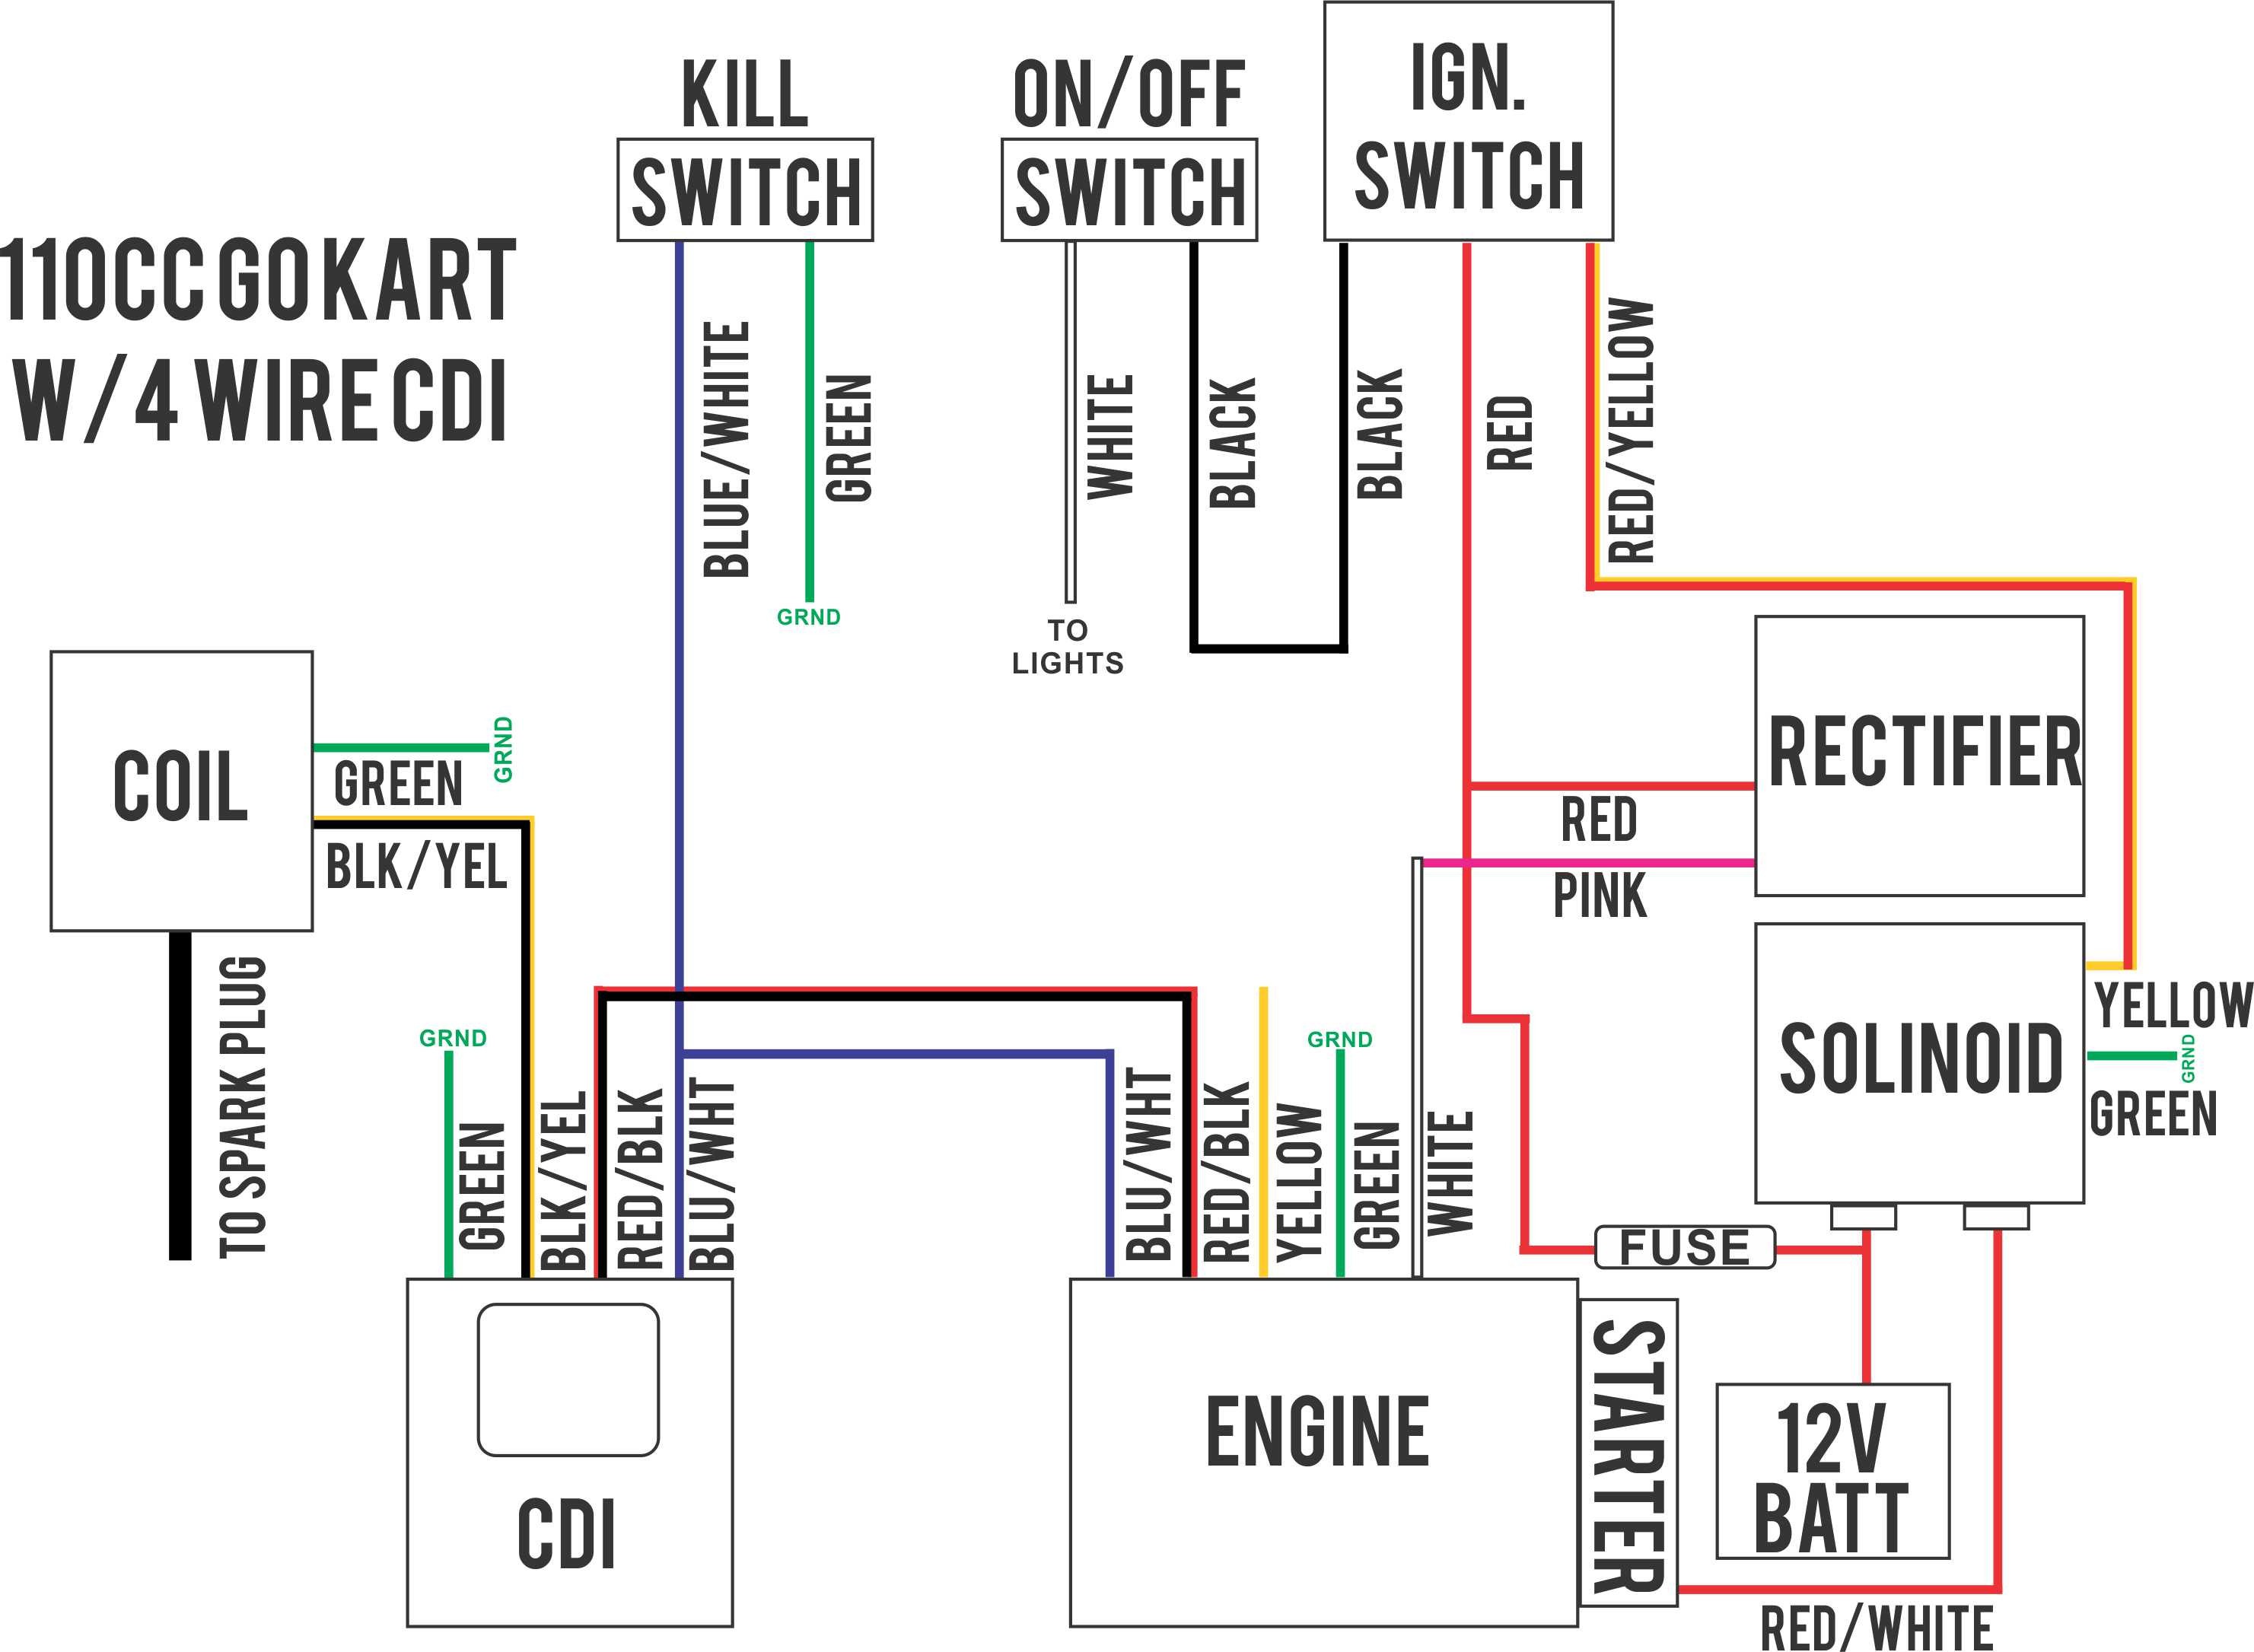 Dyna Single Fire Ignition Wiring Diagram Rate 50cc Chinese Scooter Kick Scooter Diagram 50cc Chinese Scooter Wiring Diagram